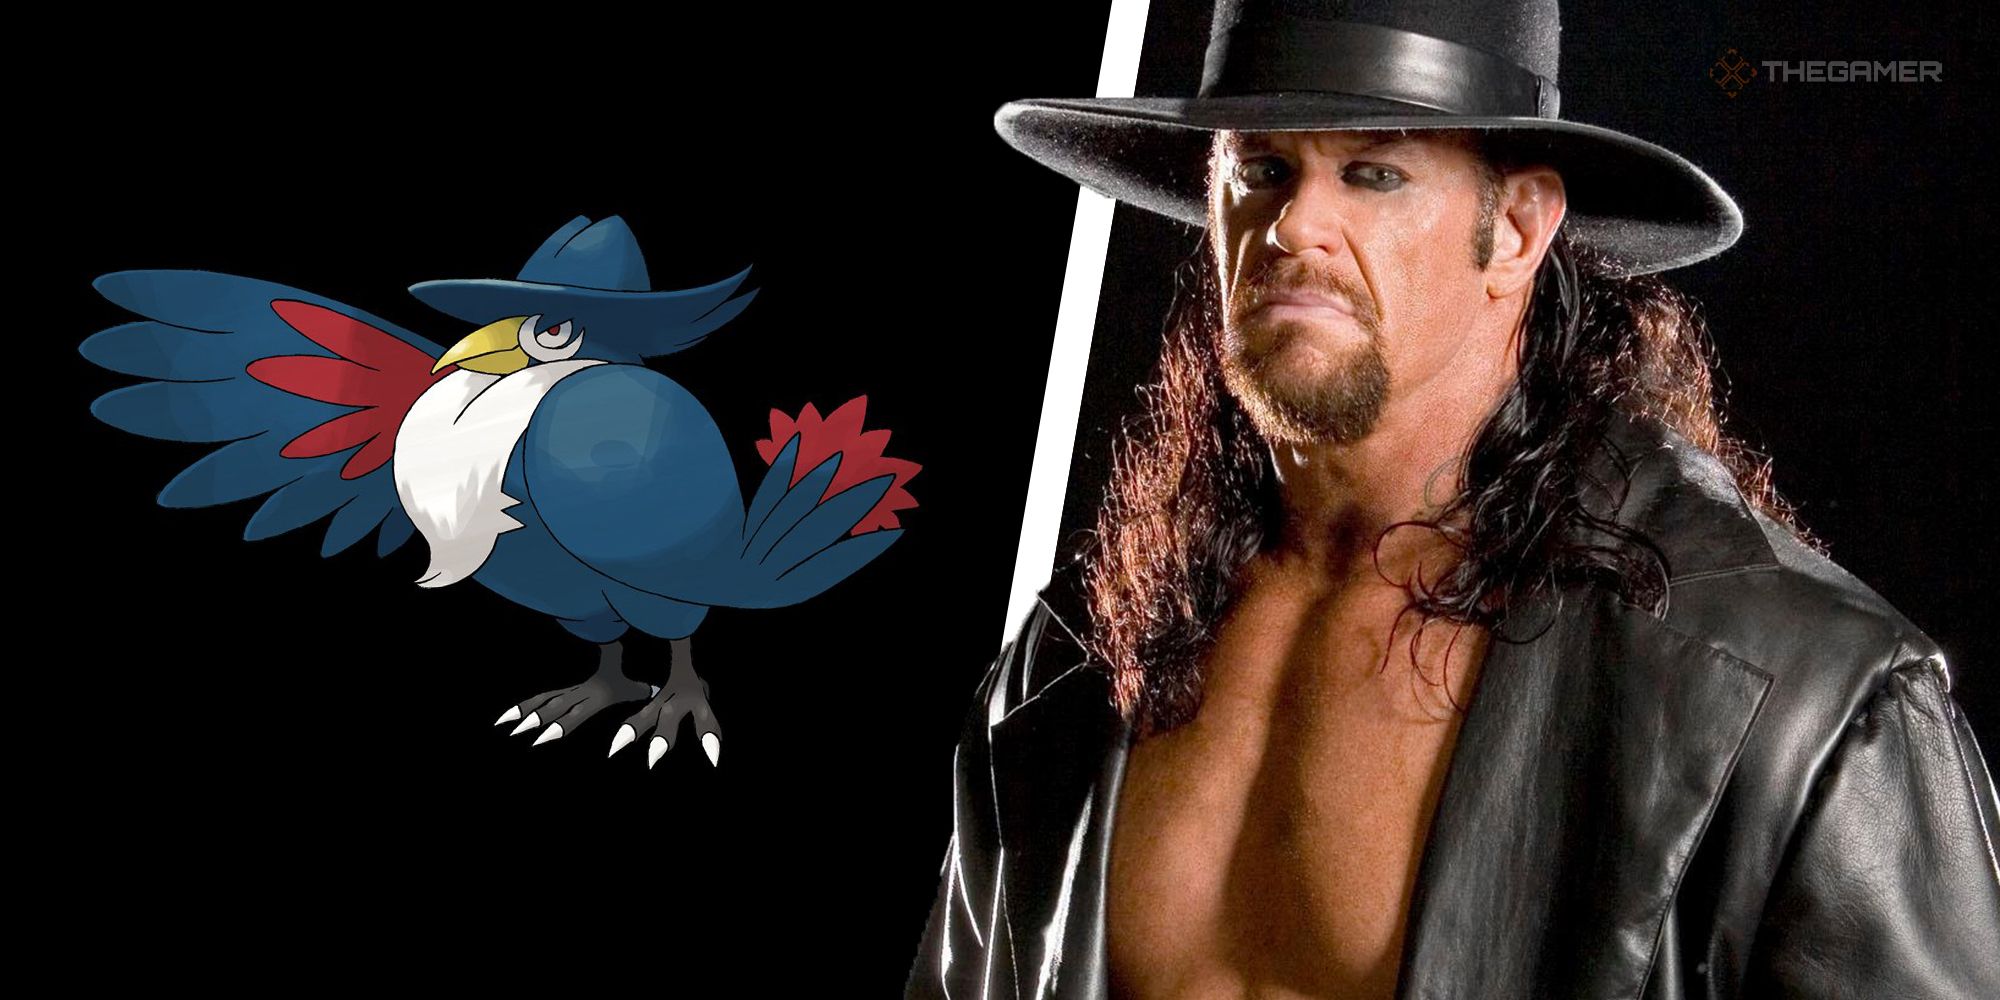 Heres 30 Wrestlers As Pokemon For The Royal Rumble (26)